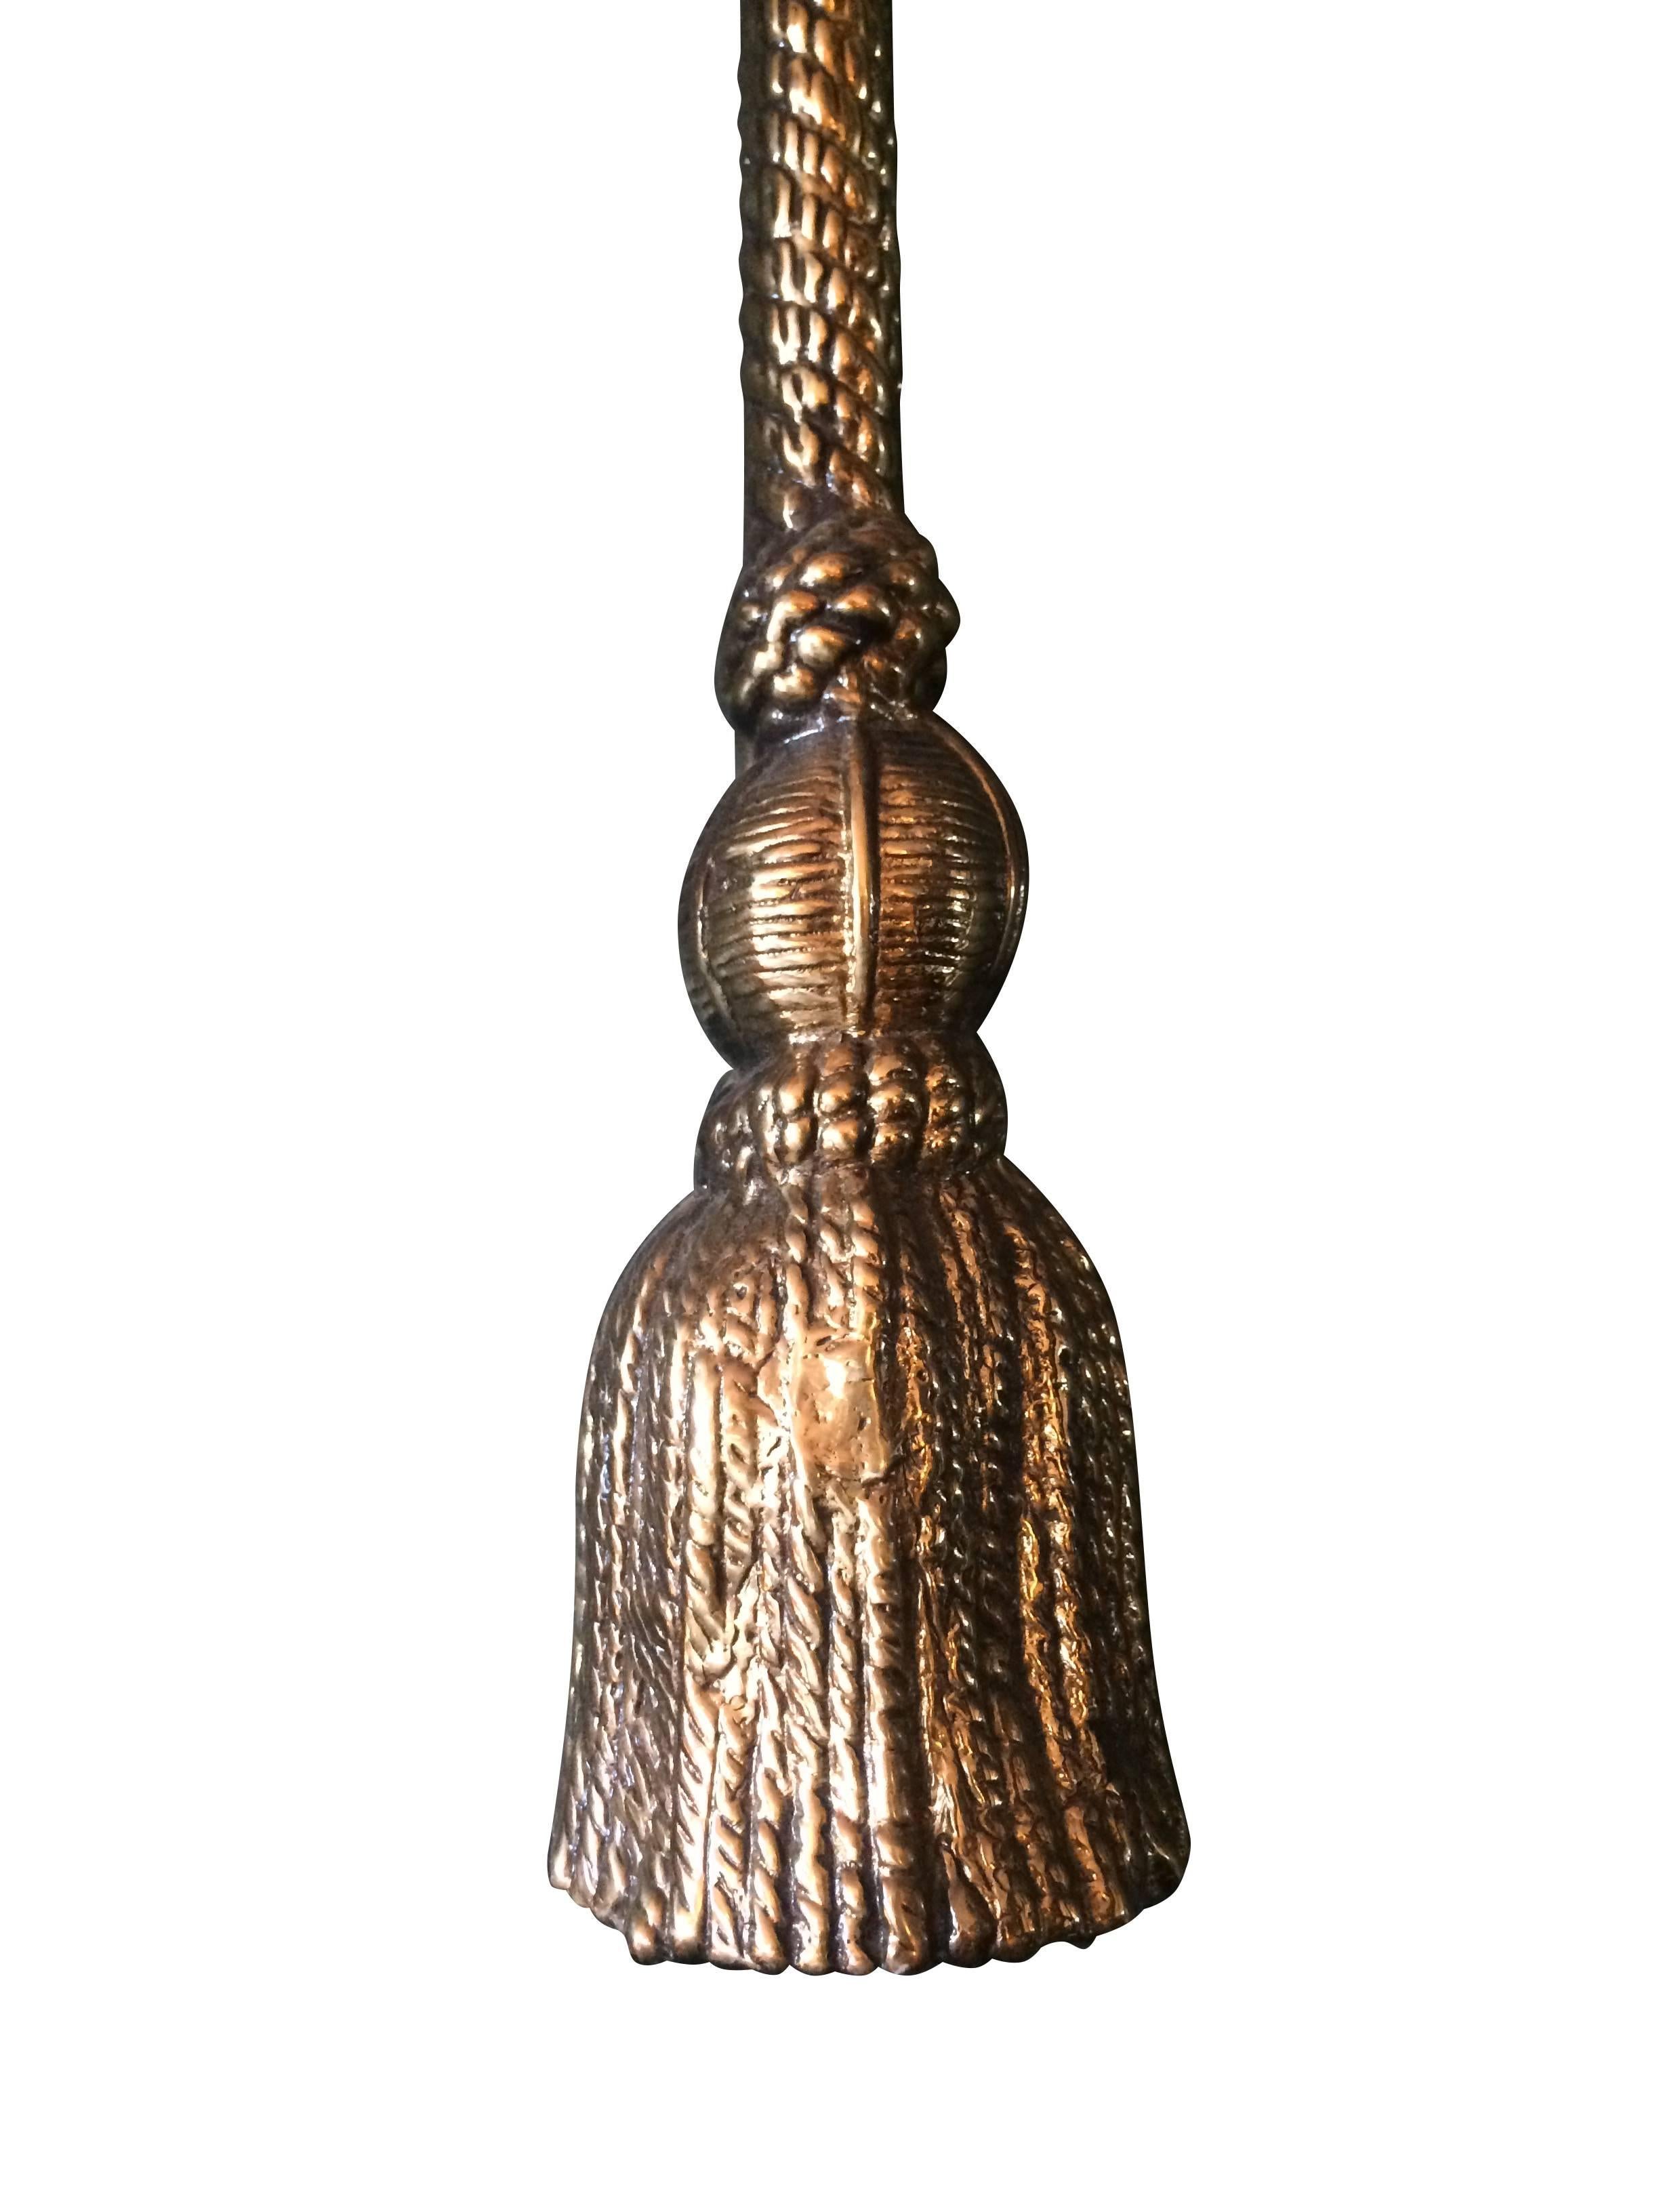 Pair of Large Valenti Brass Rope and Tassle Wall Lights 2